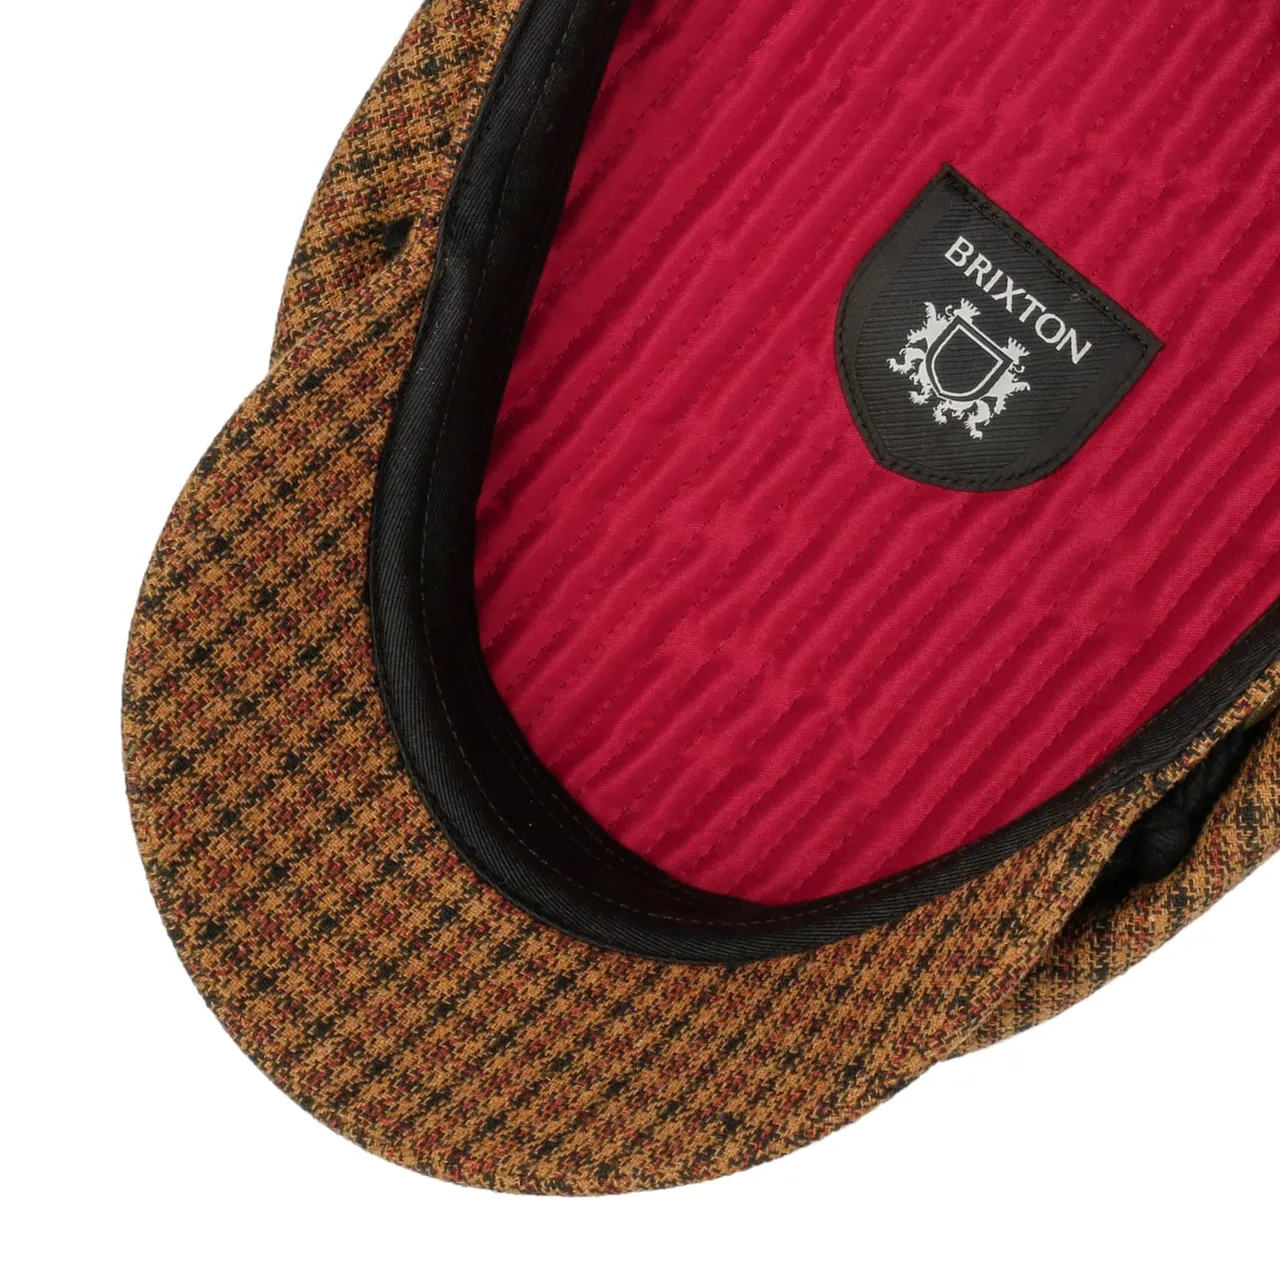 Fiddler Classic Check Schipperspet by Brixton